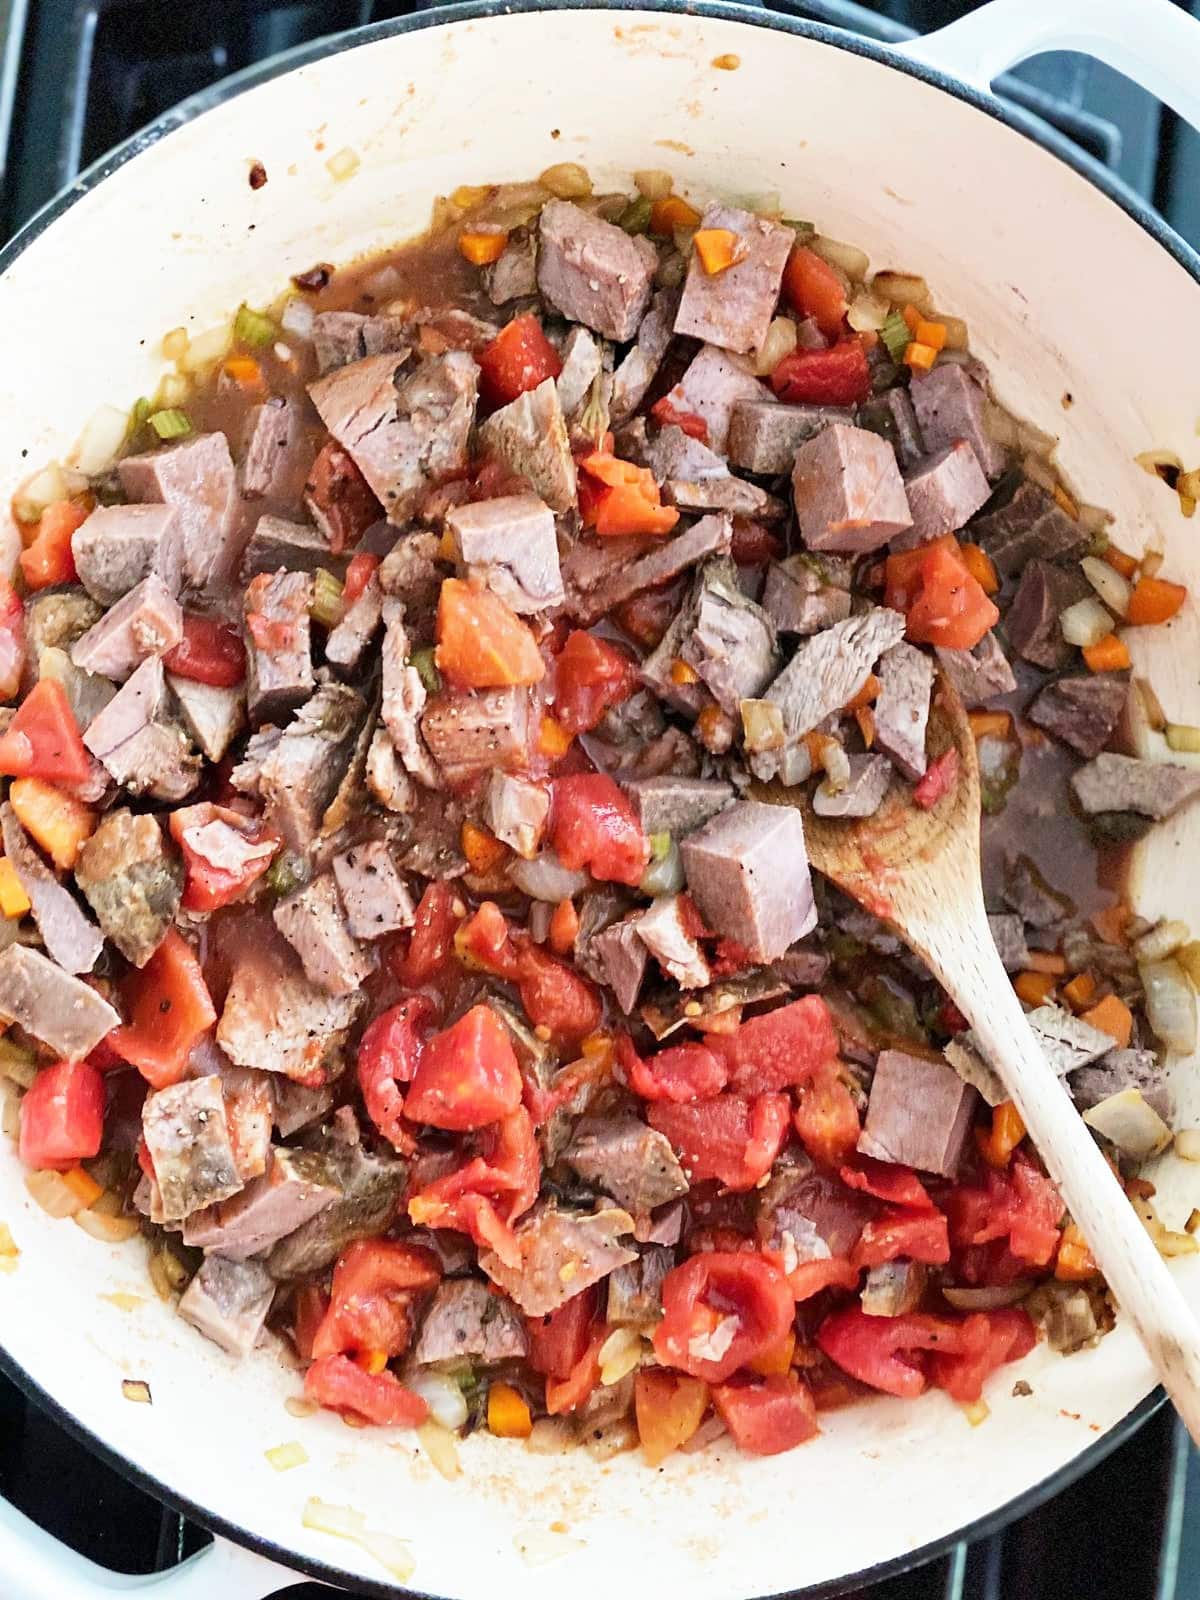 Top down image of large cooking pot with cooked vegetables, diced leftover roast lamb and tinned tomatoes.